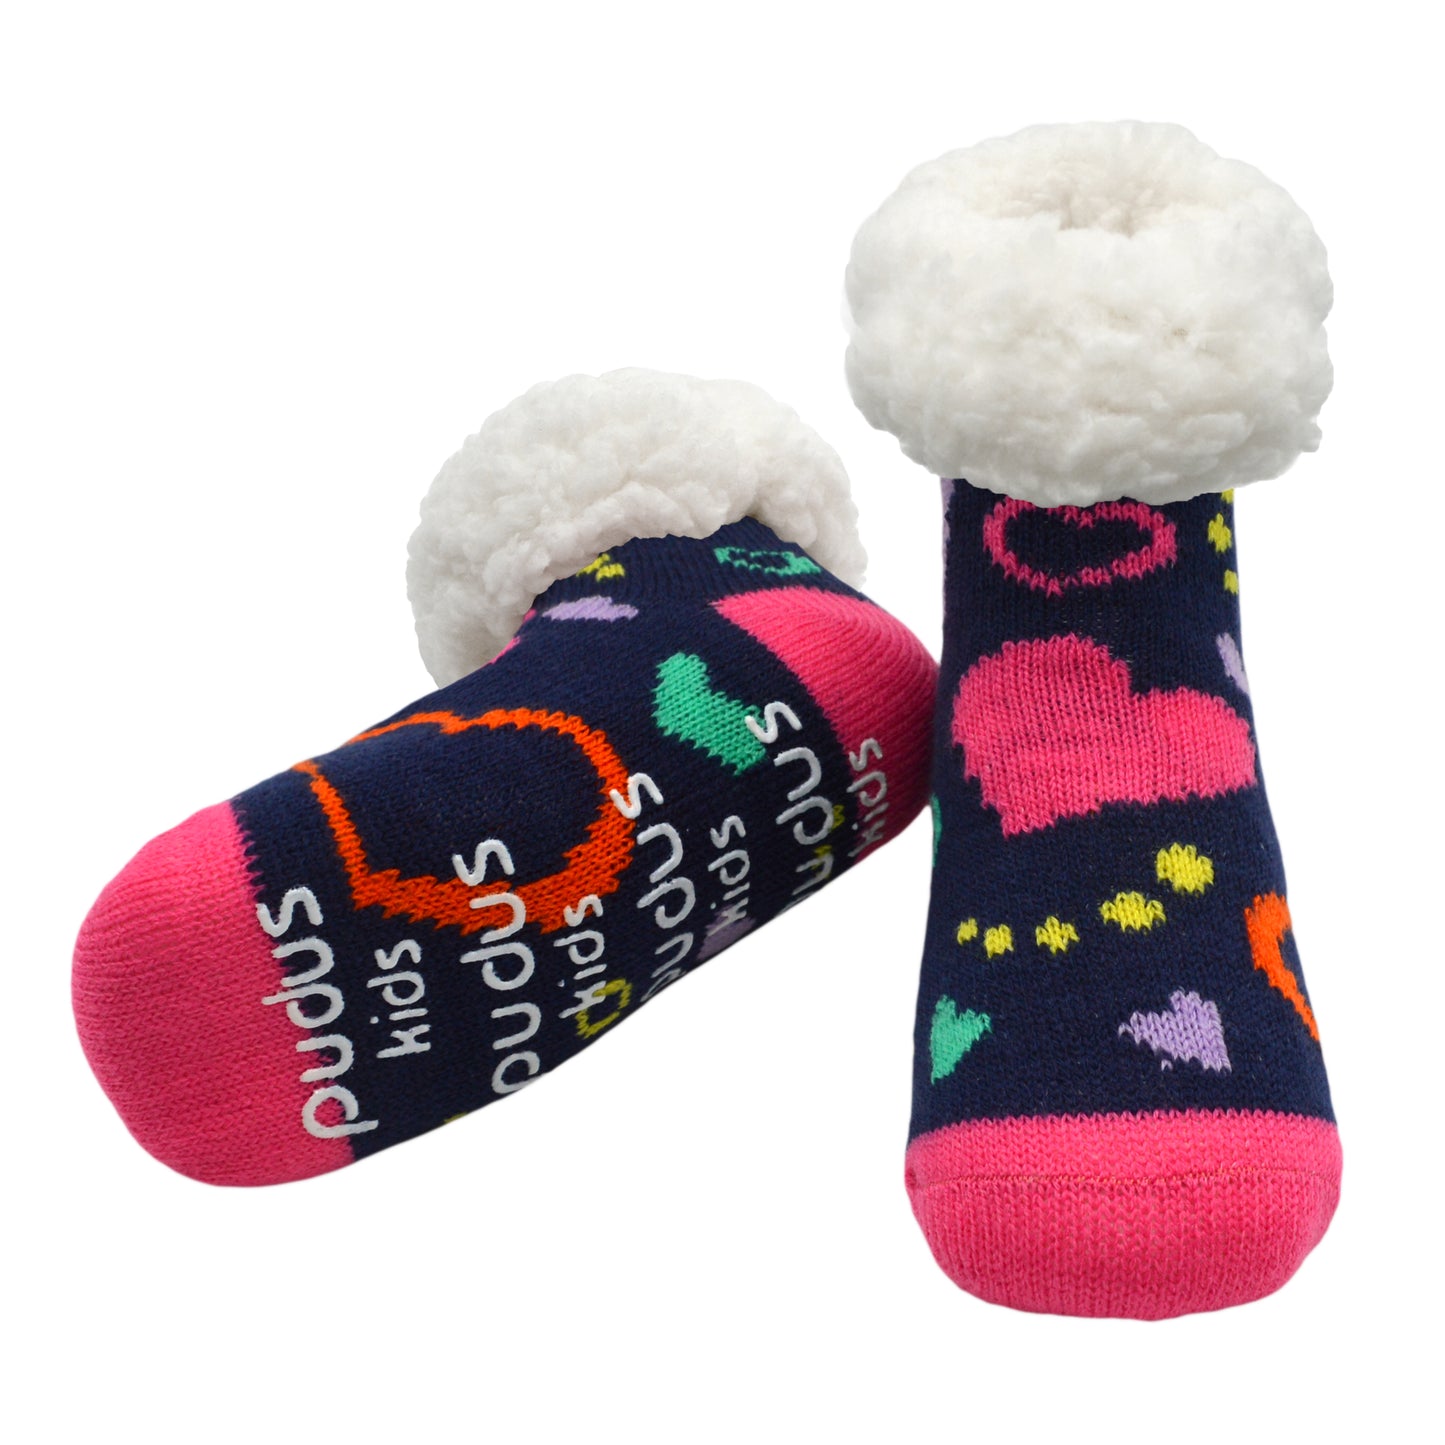 Pudus Cozy Winter Slipper Socks for Kids in Heart Navy with Non-Slip Grippers and Faux Fur Sherpa Fleece - Boy and Girl Fuzzy Socks (Ages 4-7)